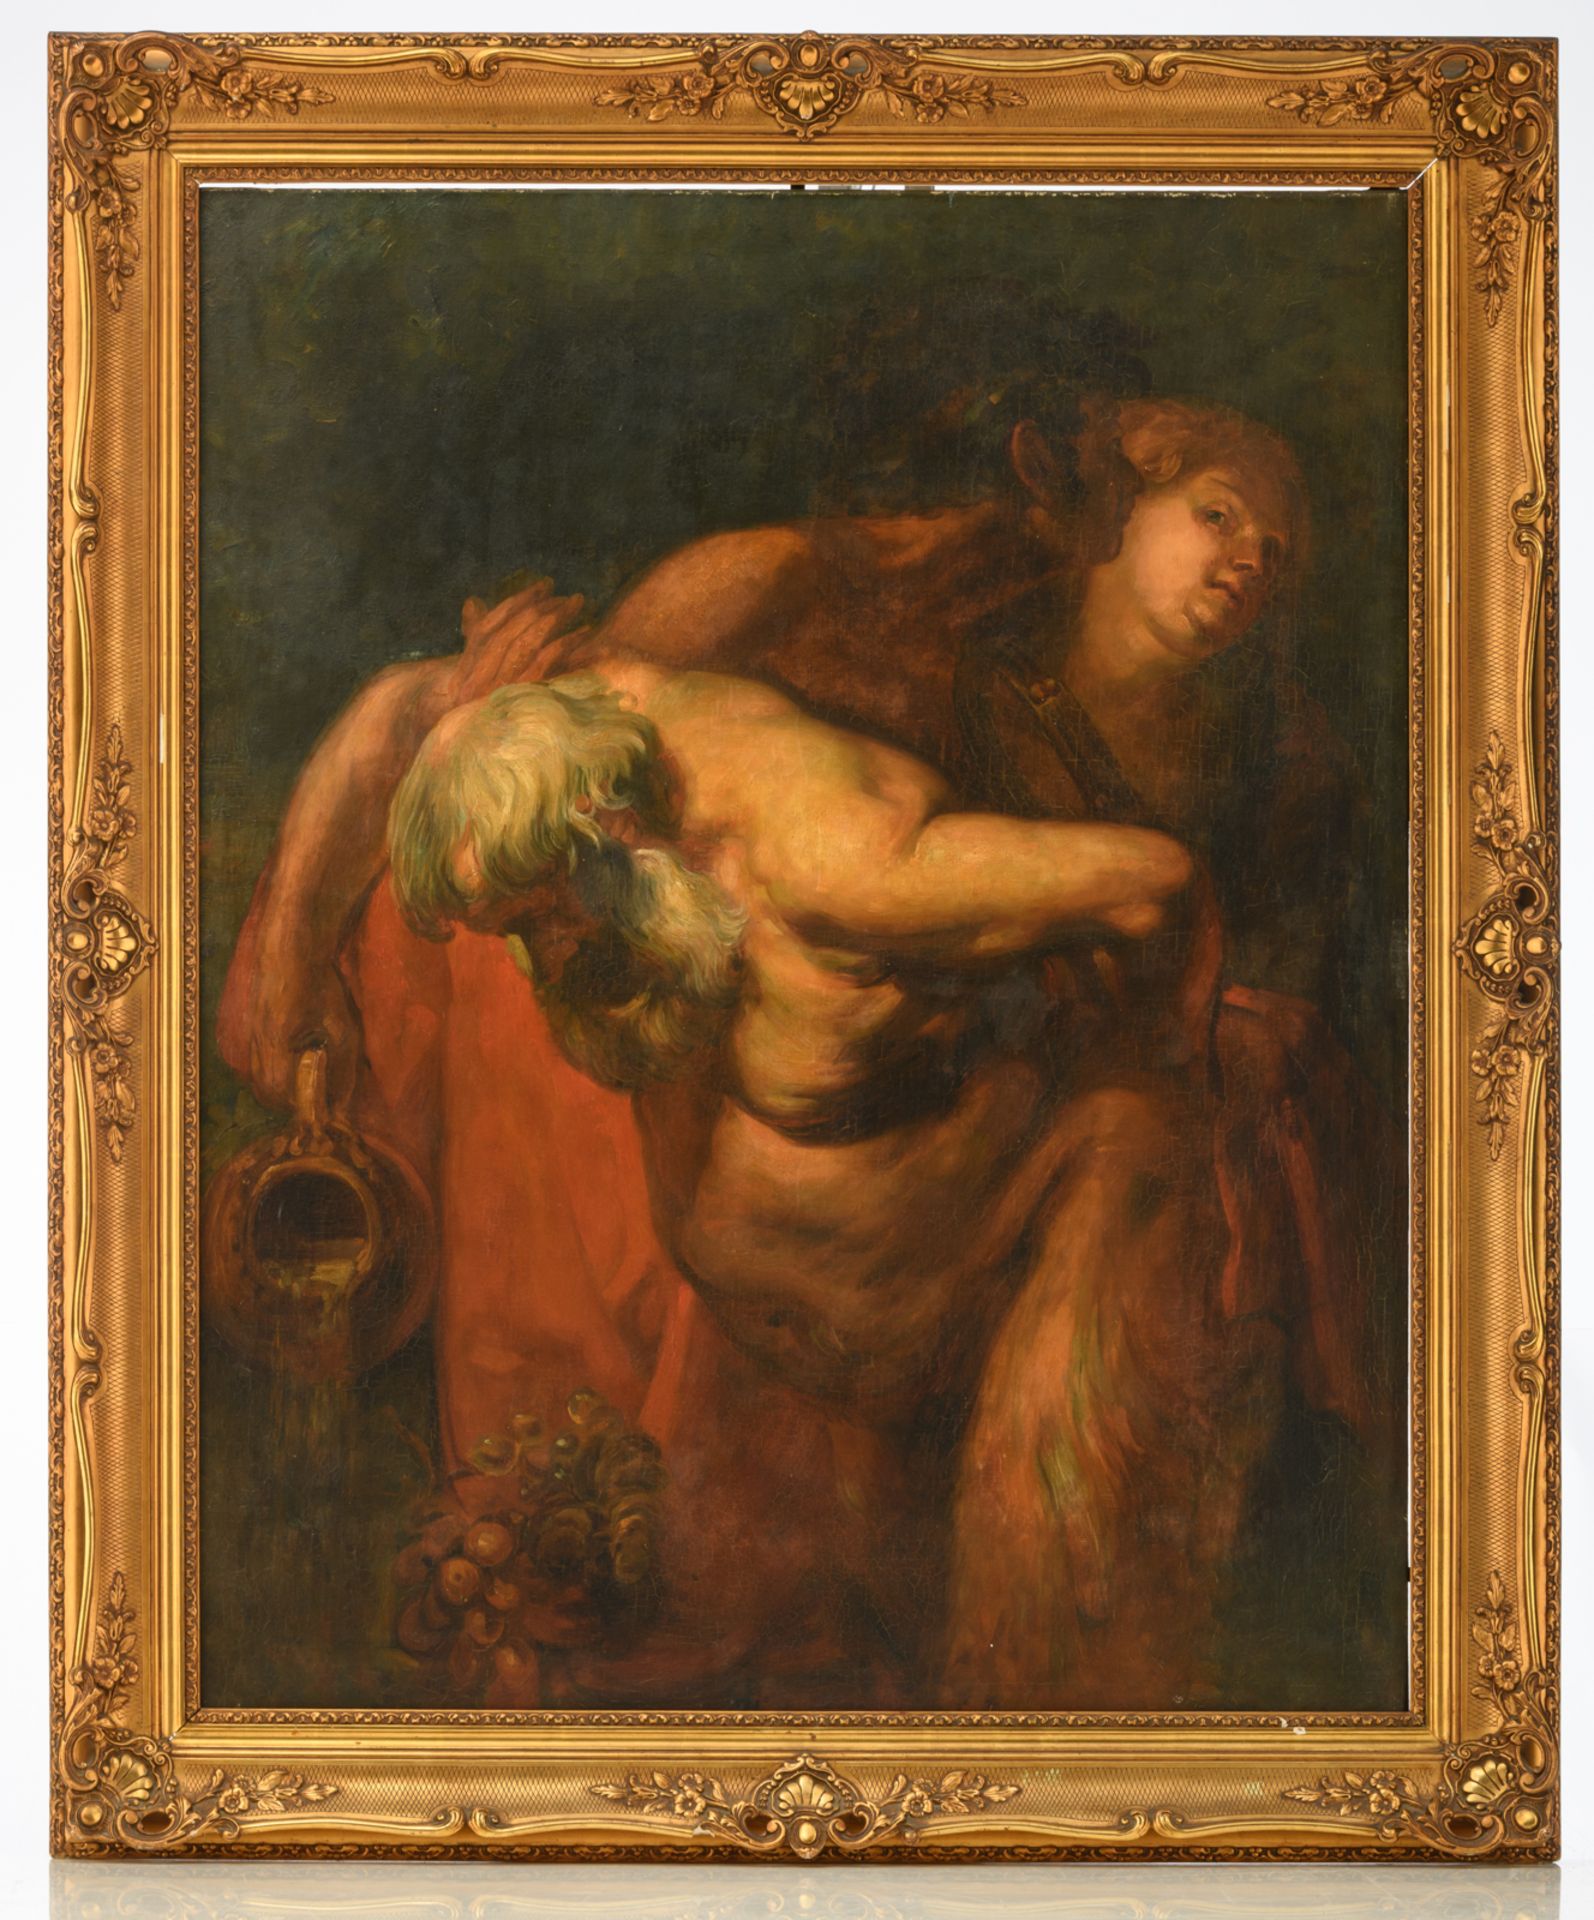 No visible signature, after the famous "Drunken Silenus" by Anthony Van Dijck in the collection of t - Image 2 of 3